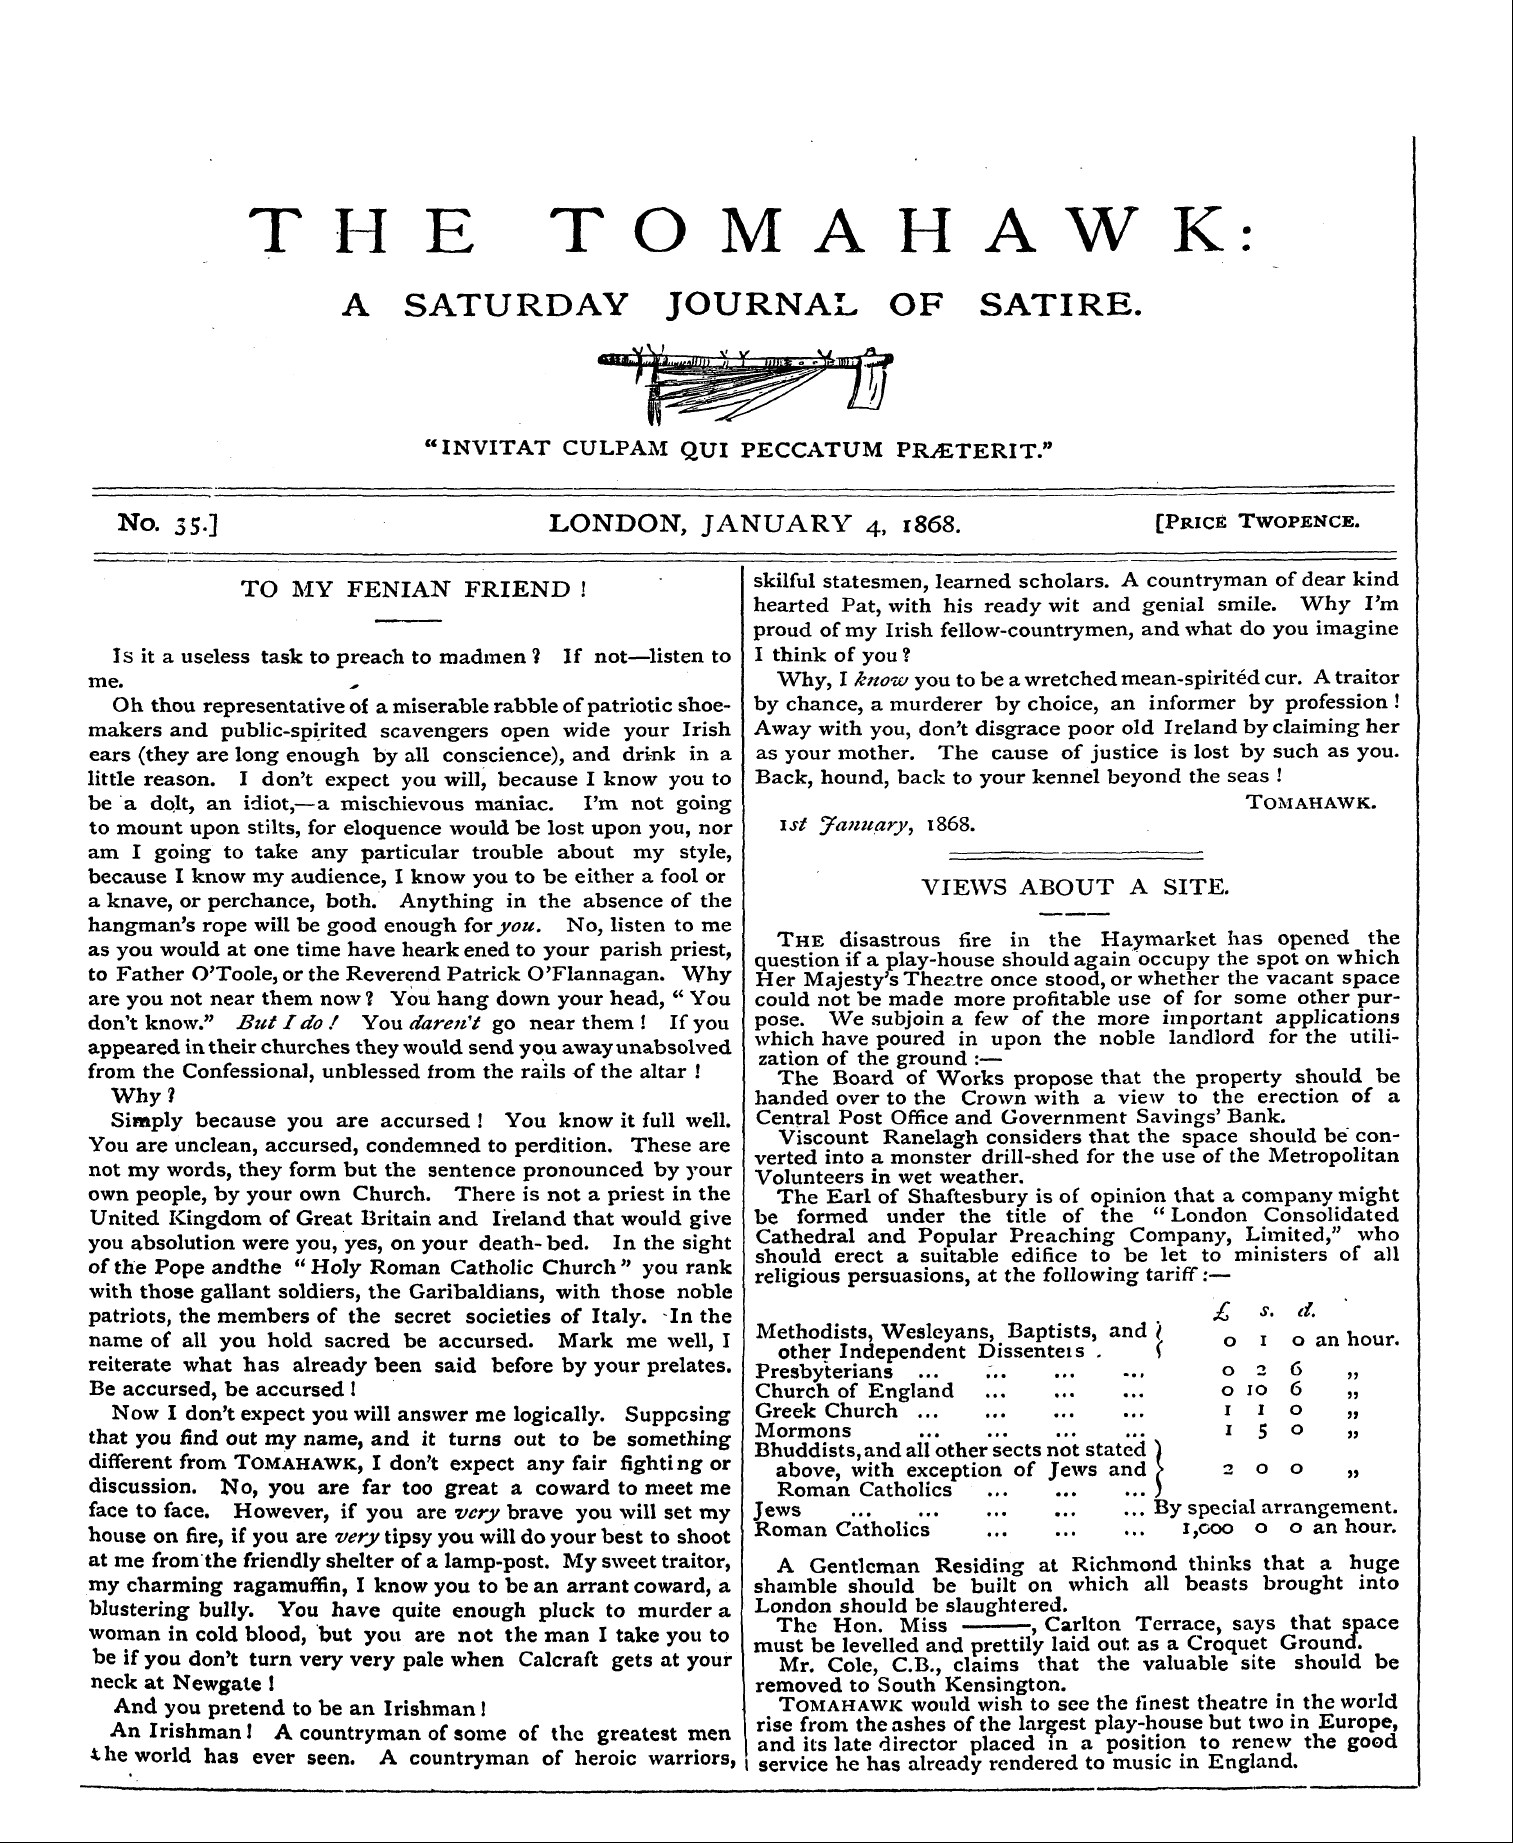 Tomahawk (1867-1870): jS F Y, 1st edition - Is It A Useless Task To Preach To Madmen...